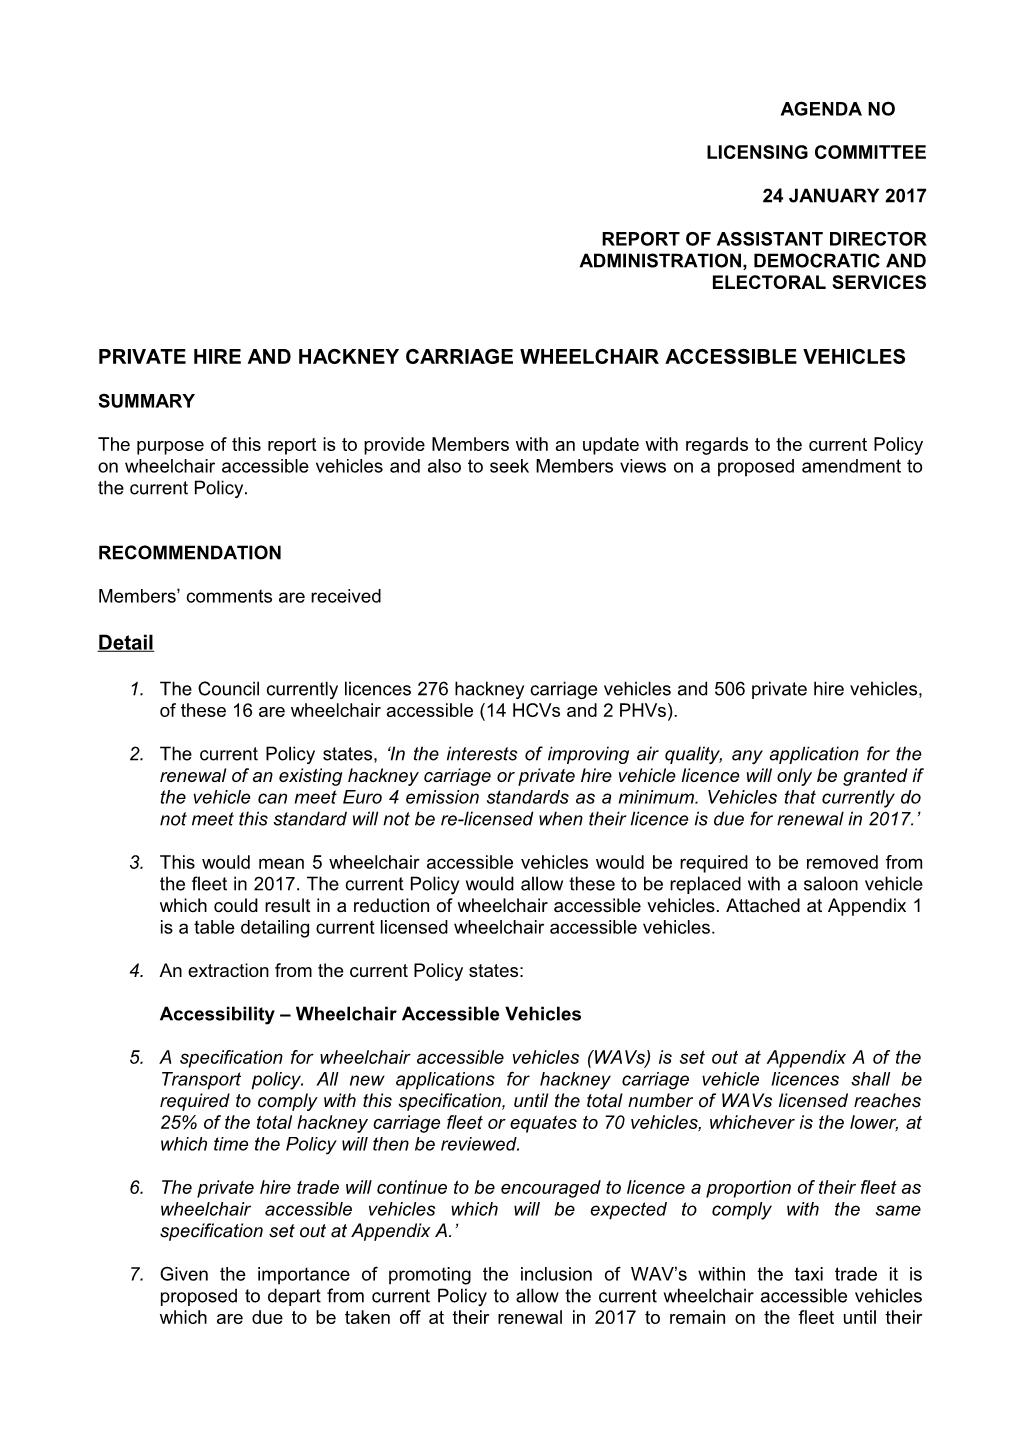 Report of Assistant Director Administration, Democratic and Electoral Services